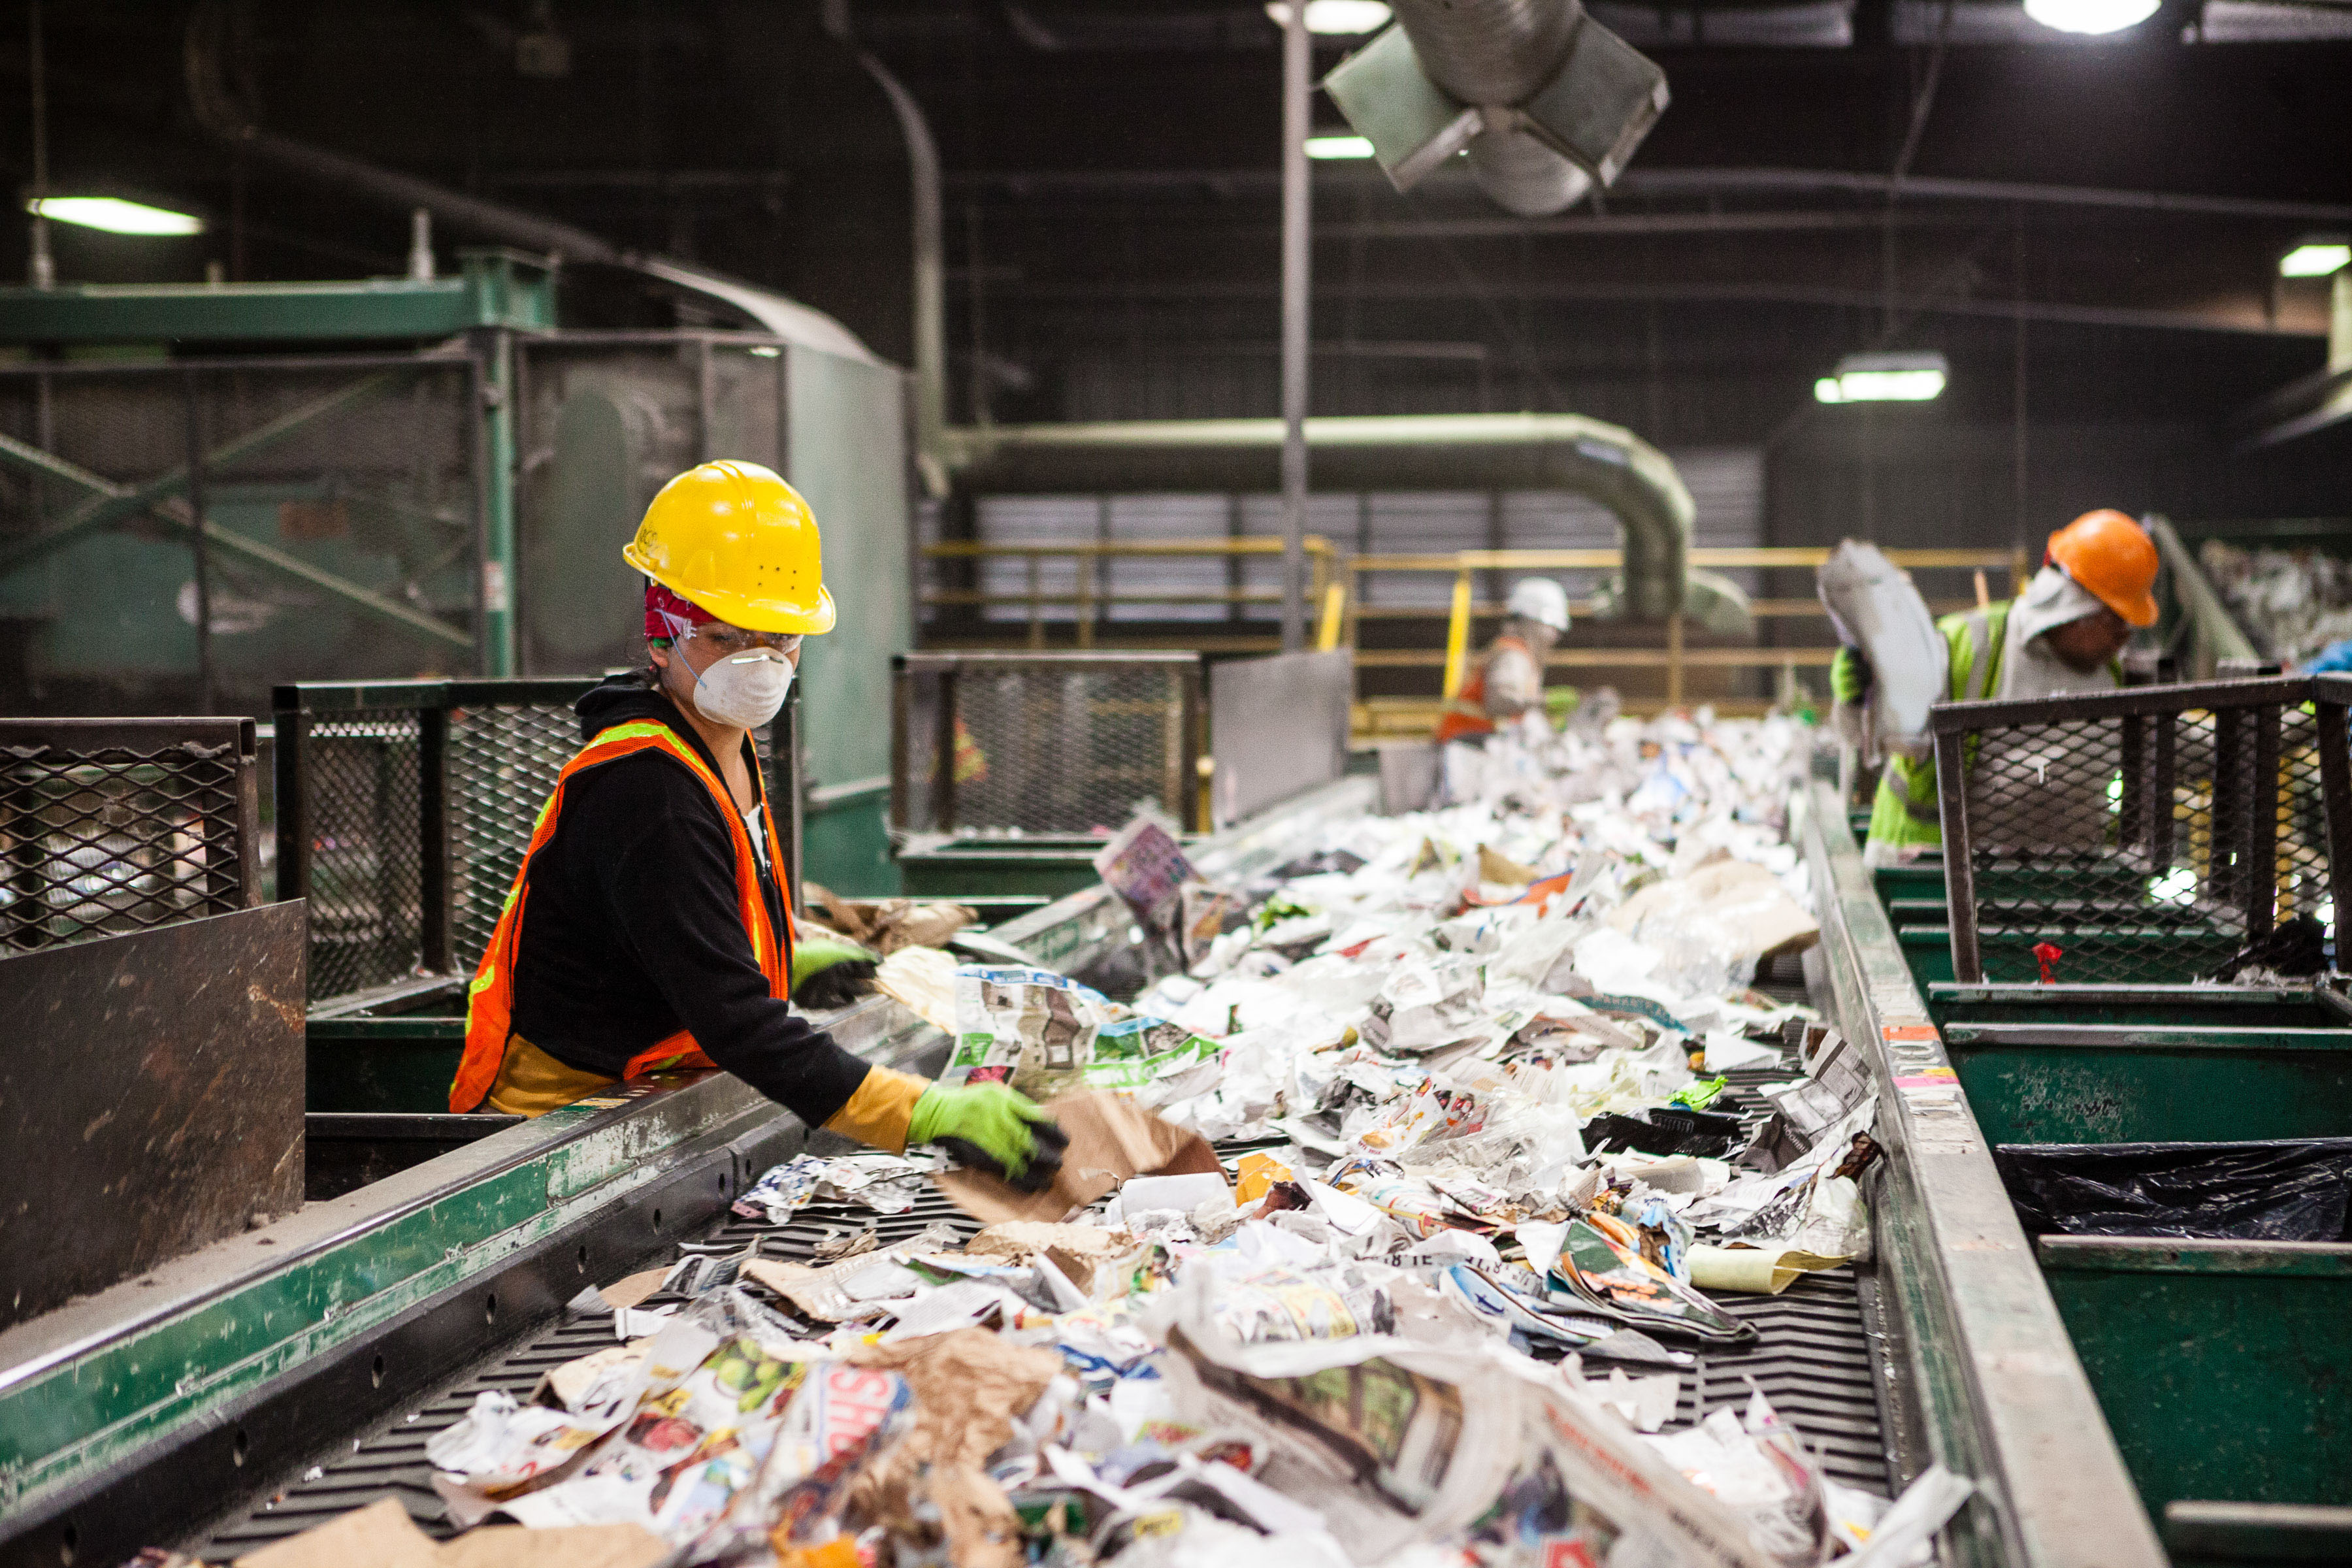 Employees at Farwest Fibers at work sorting paper